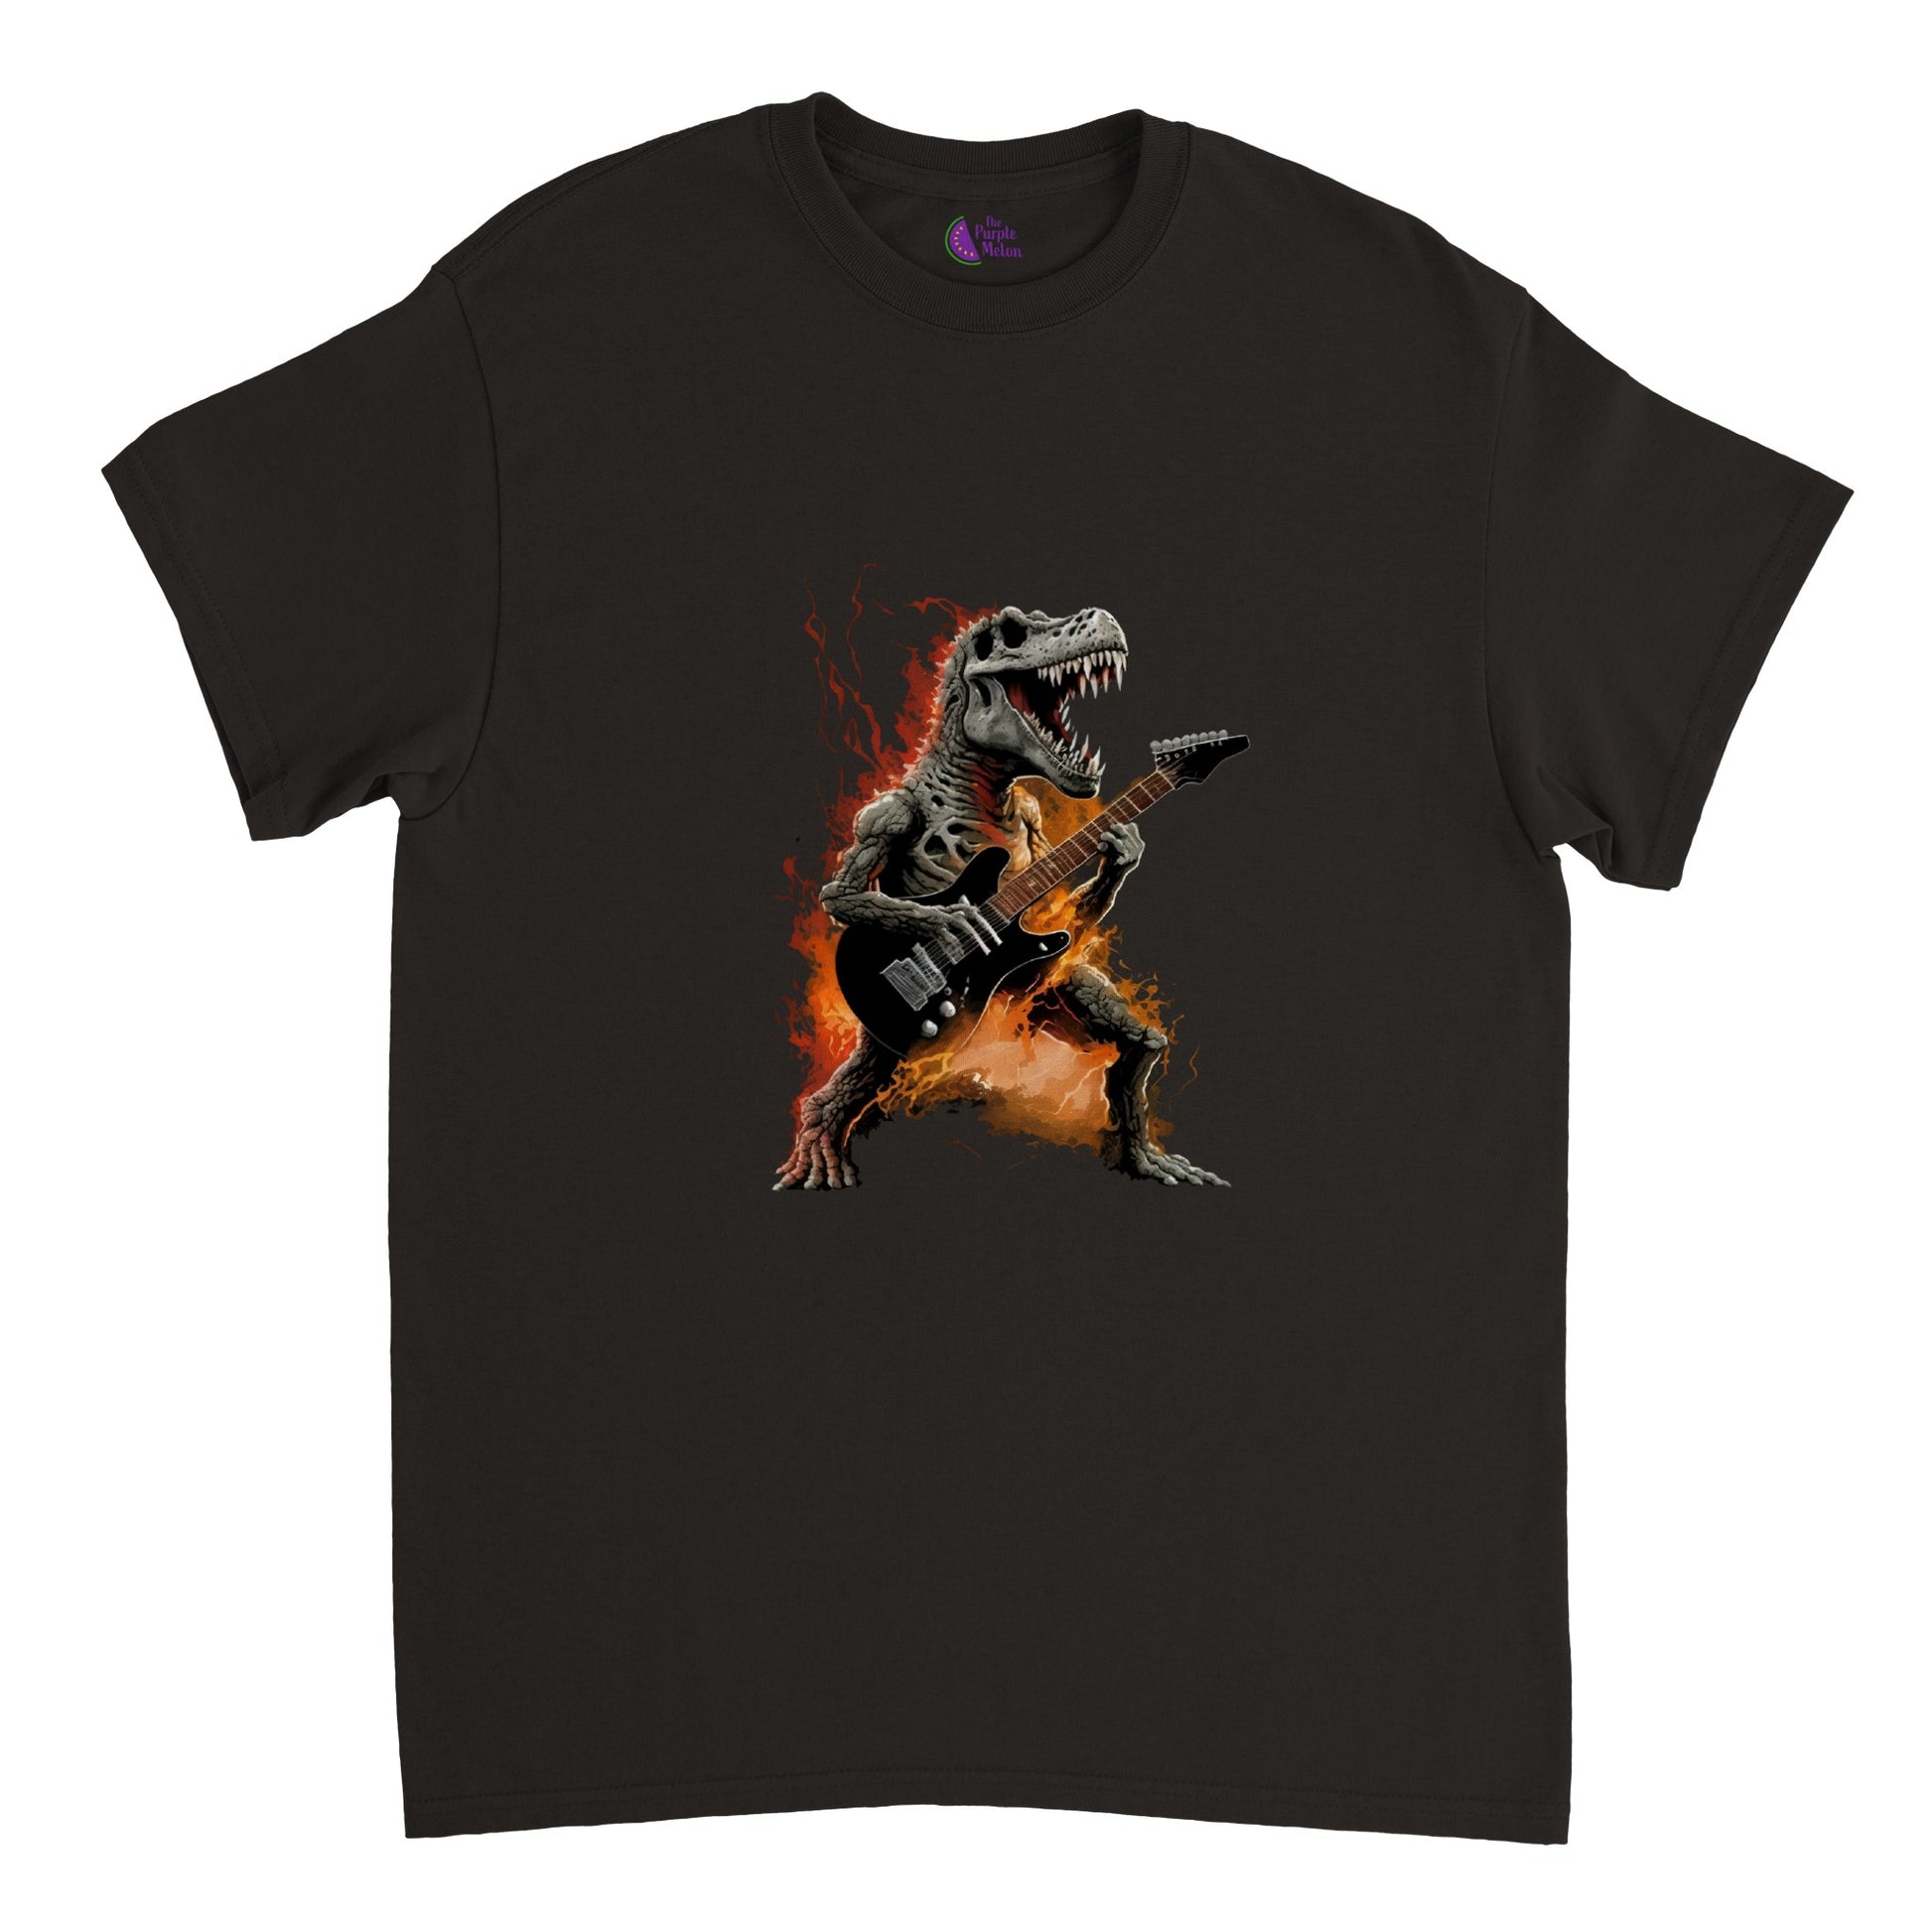 Navy t-shirt with a flaming t-rex playing the guitar graphic